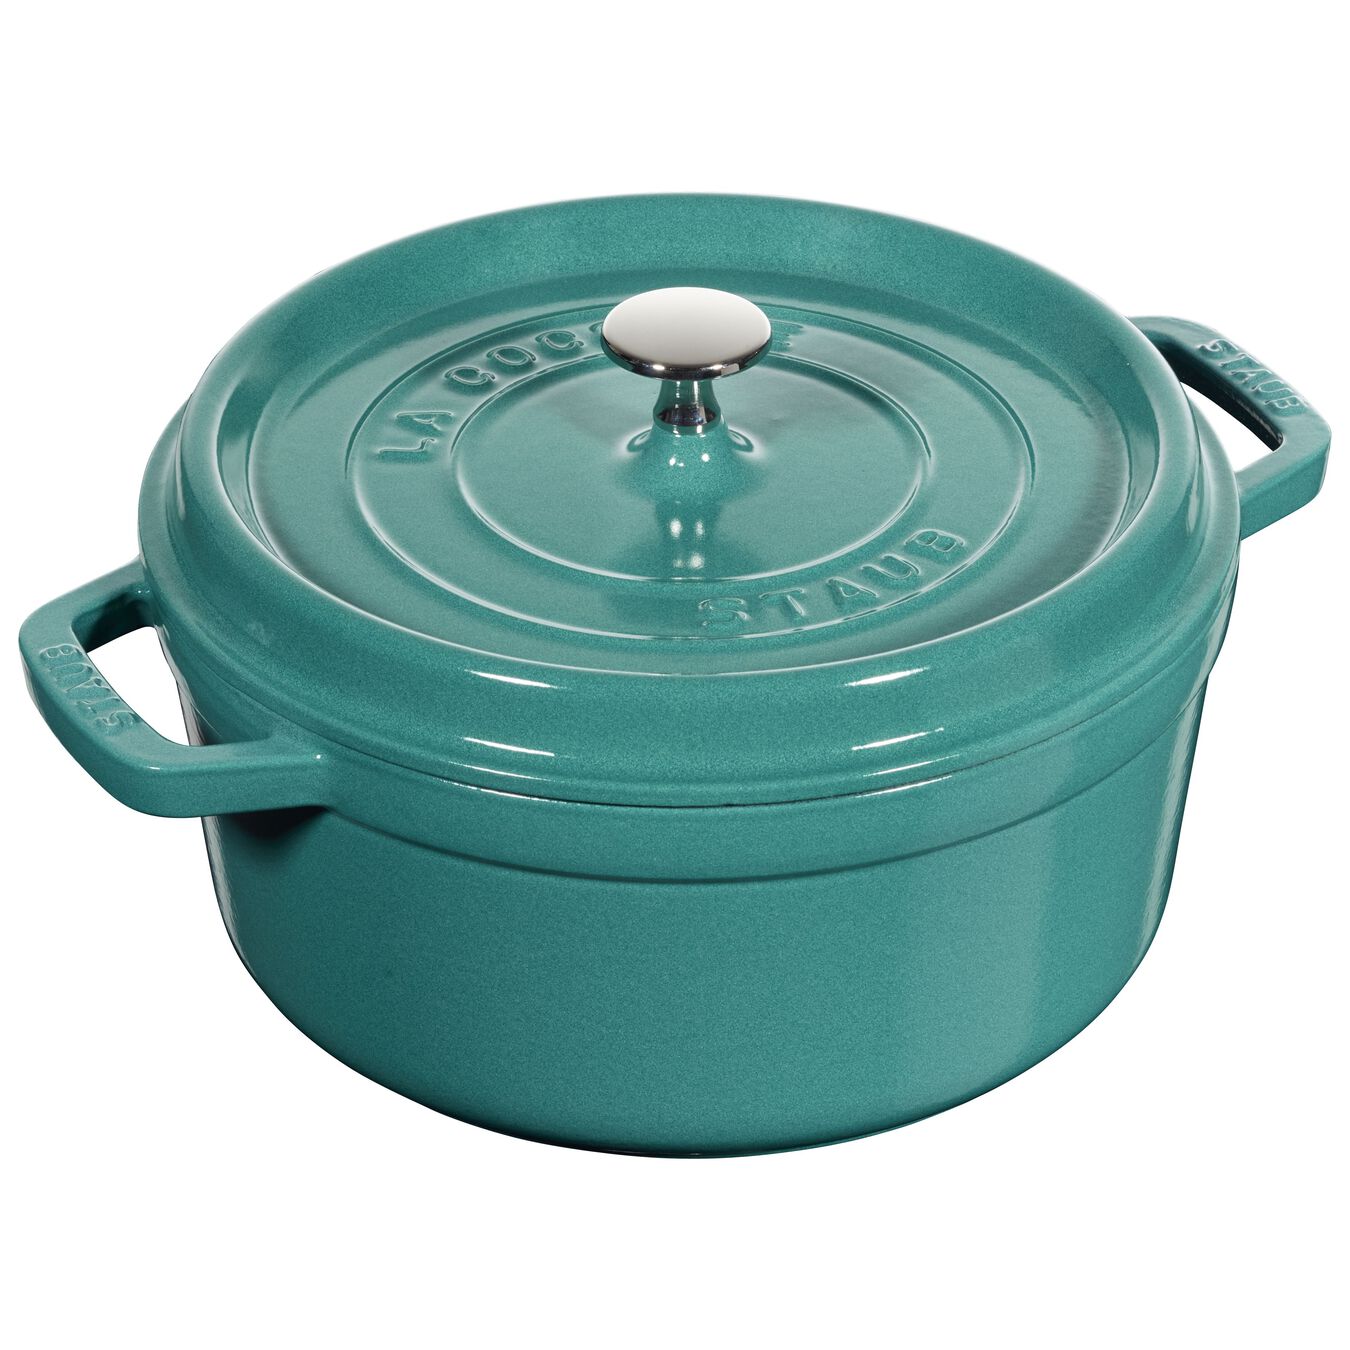  STAUB Cast Iron Dutch Oven 4-qt Round Cocotte, Made in